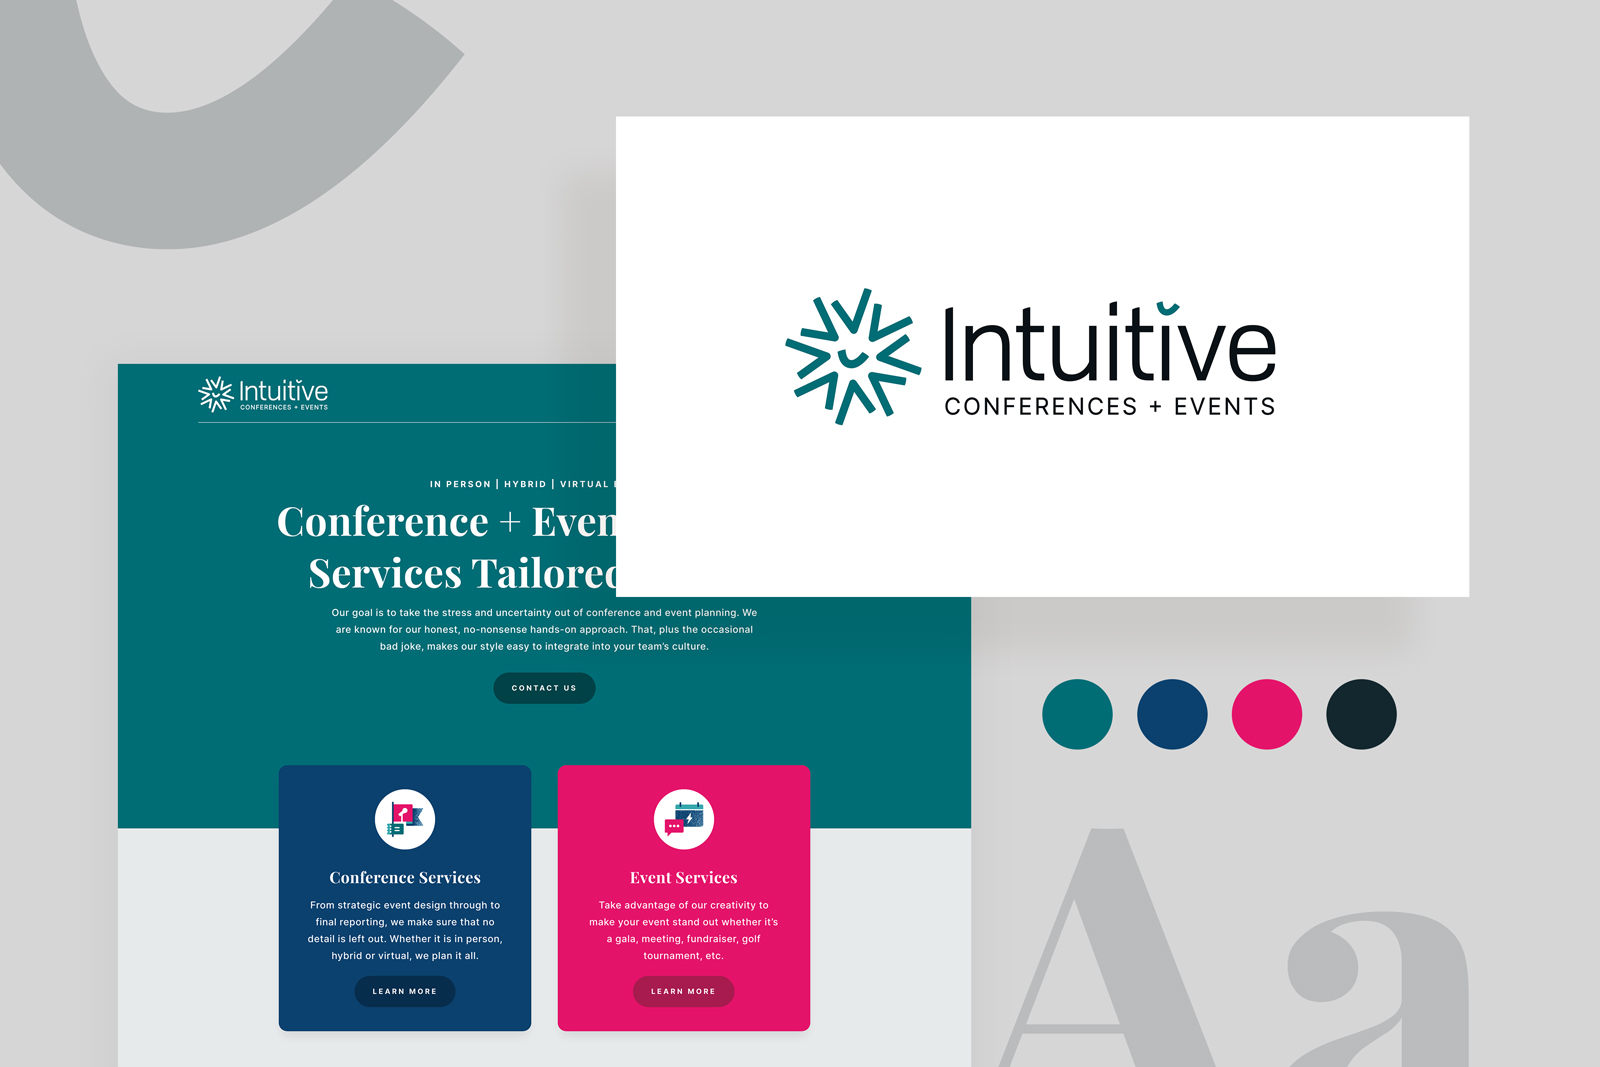 Intuitive Conference + Events